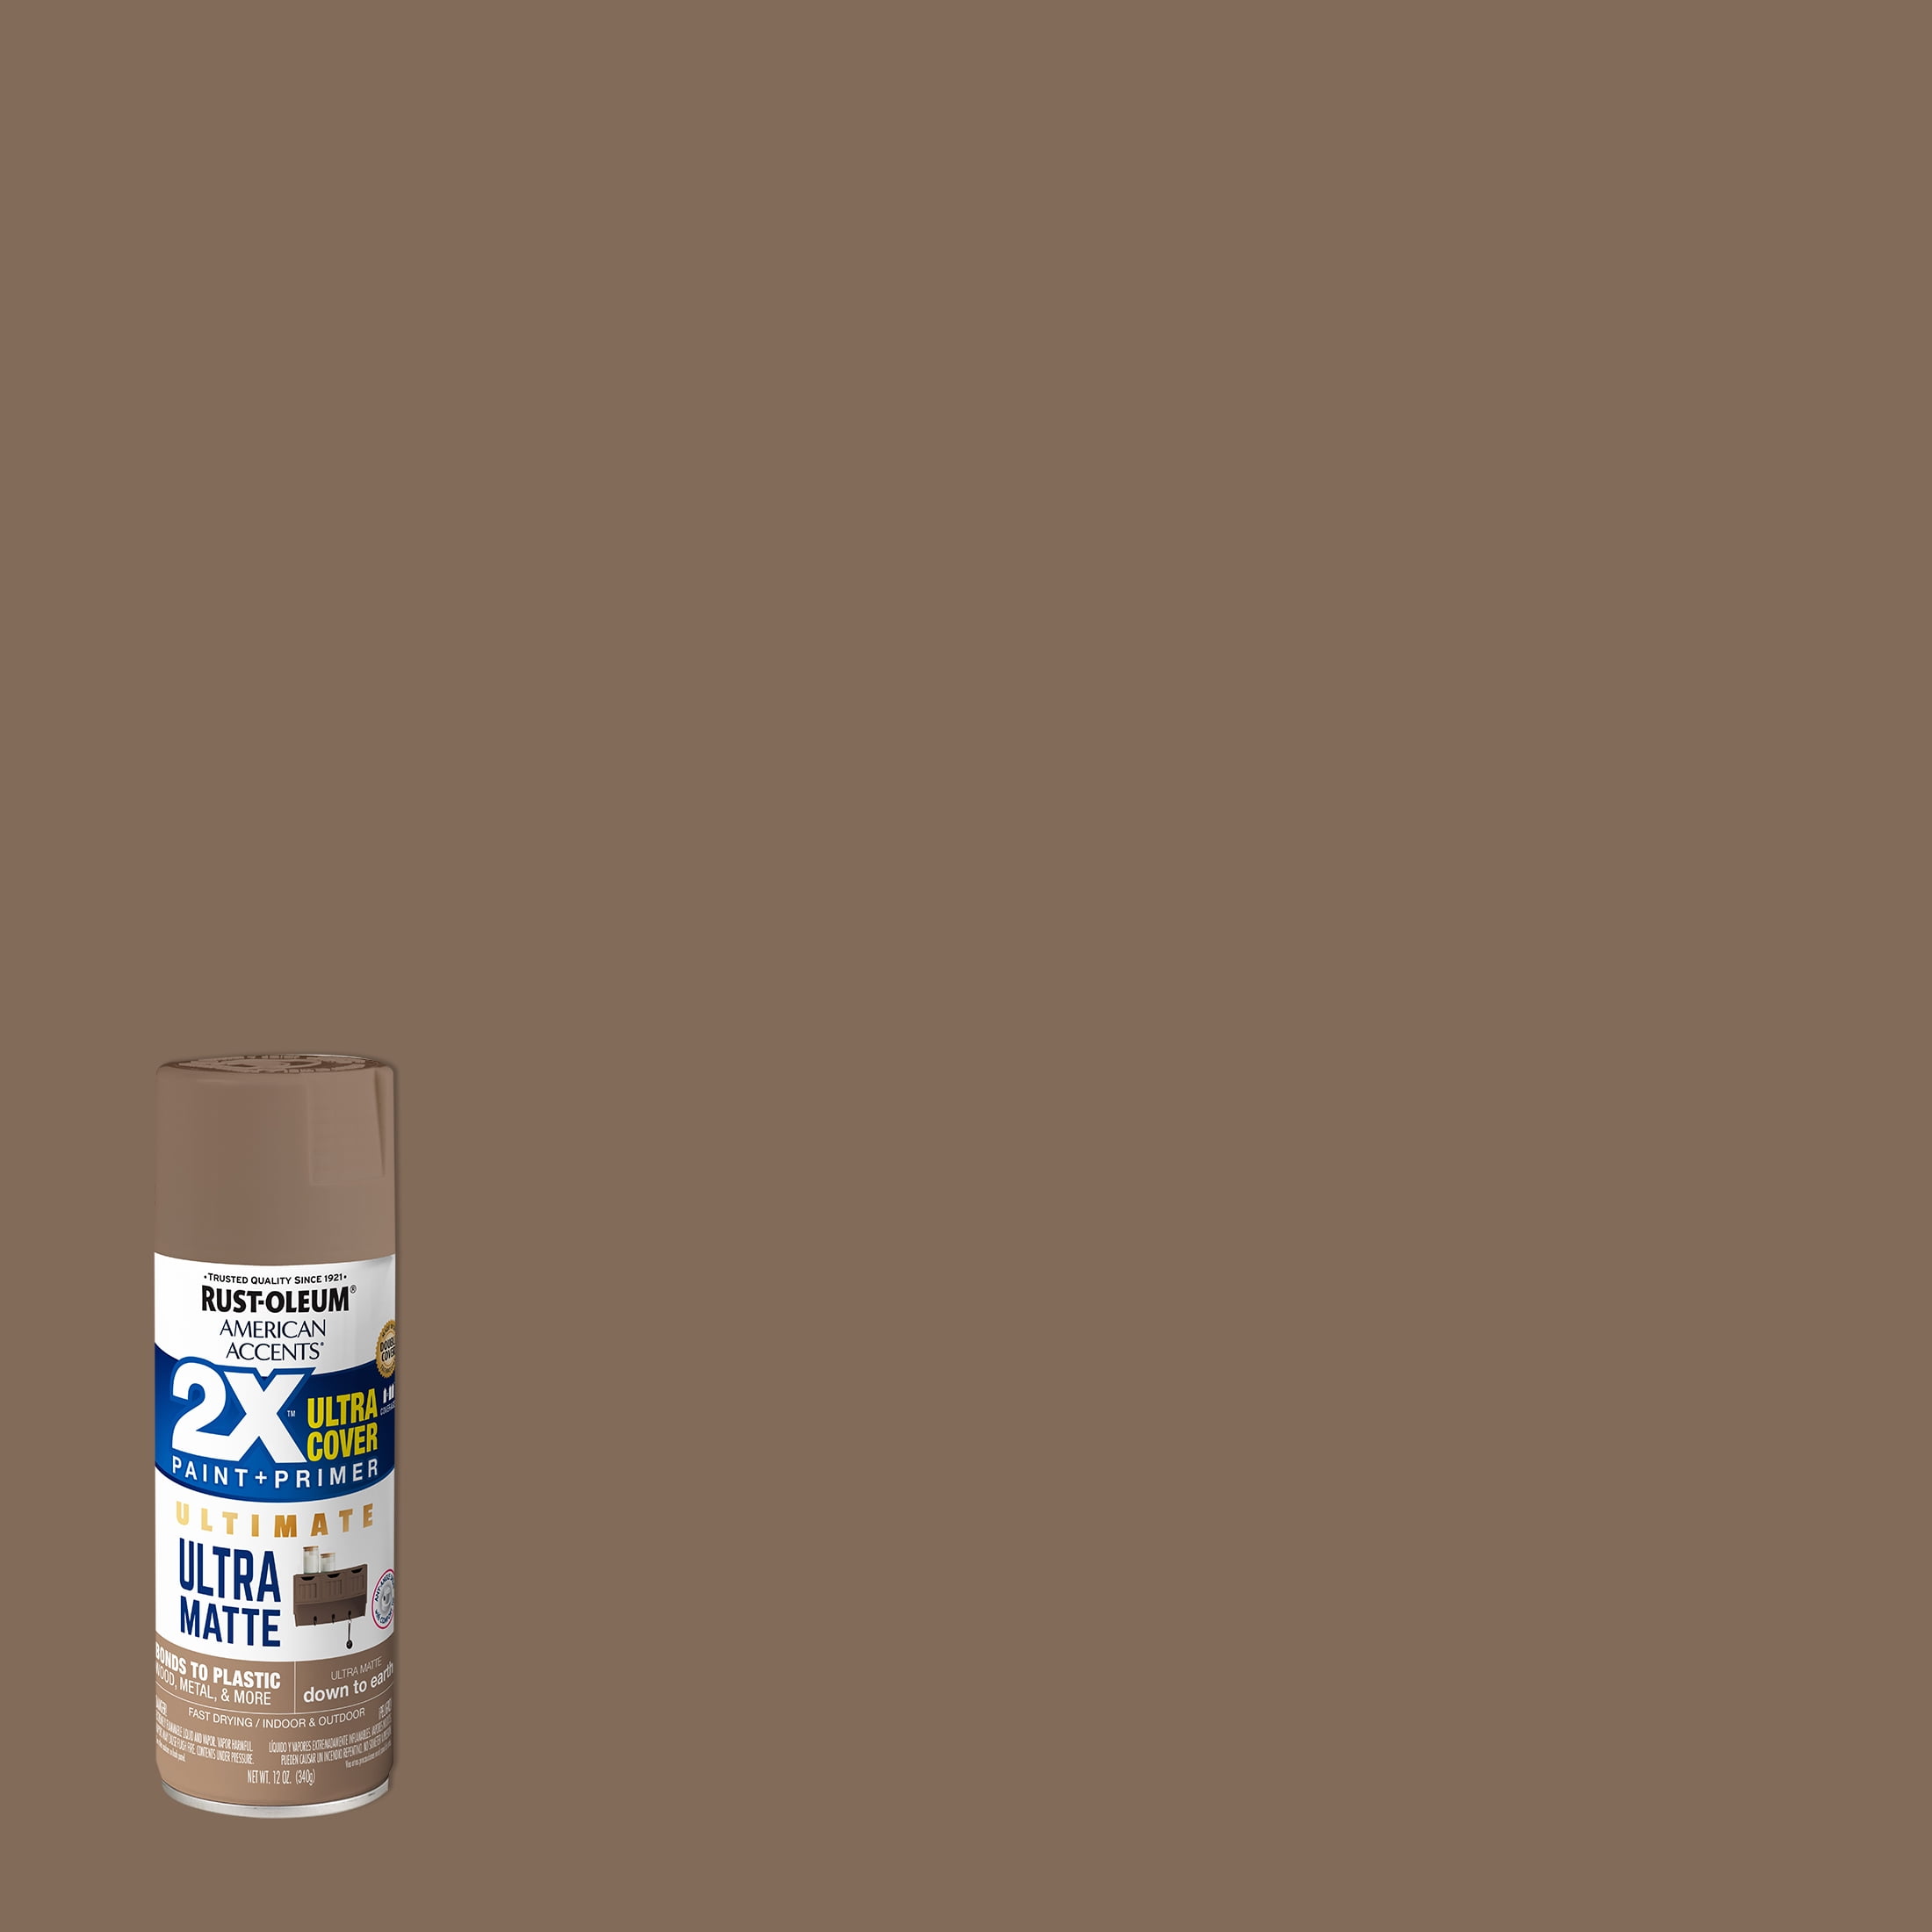 Rust-Oleum® Sure Color® Interior Wall Paint and Primer - Antique White, 2  ct / 128 fl oz - Fry's Food Stores